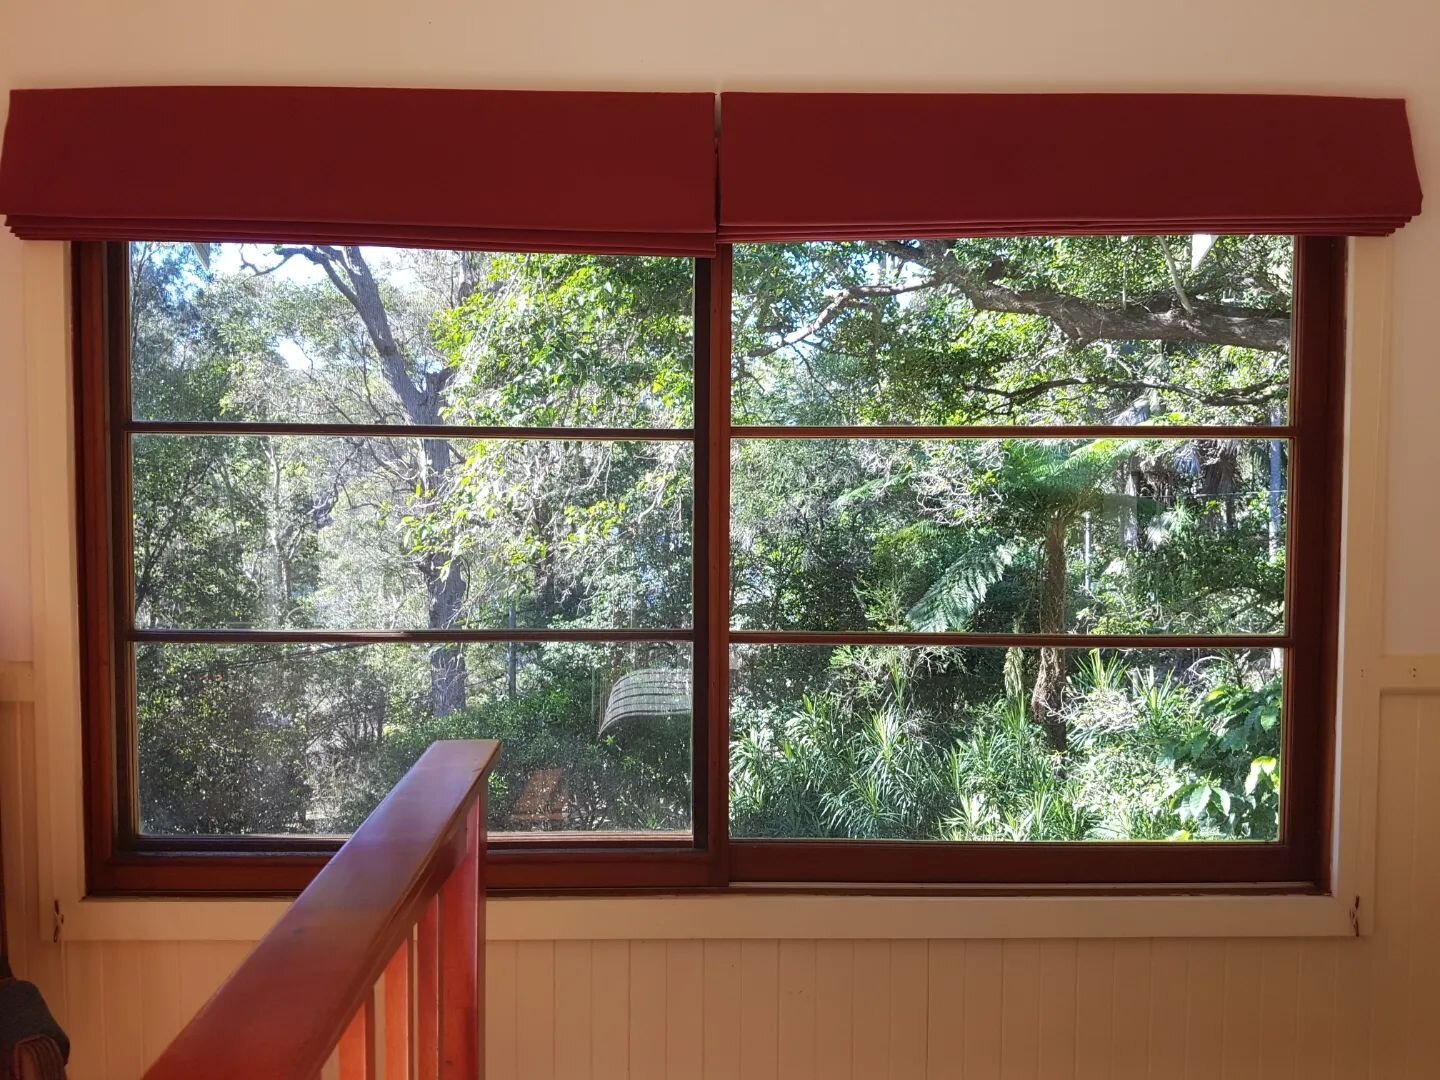 Prior to the decision to replace all the windows and doors, I was adamant that the old windows had to find a new home. At about 30 years old these cedar windows still have a lot of life left in them.

Thankfully one of my clients has decided to incor